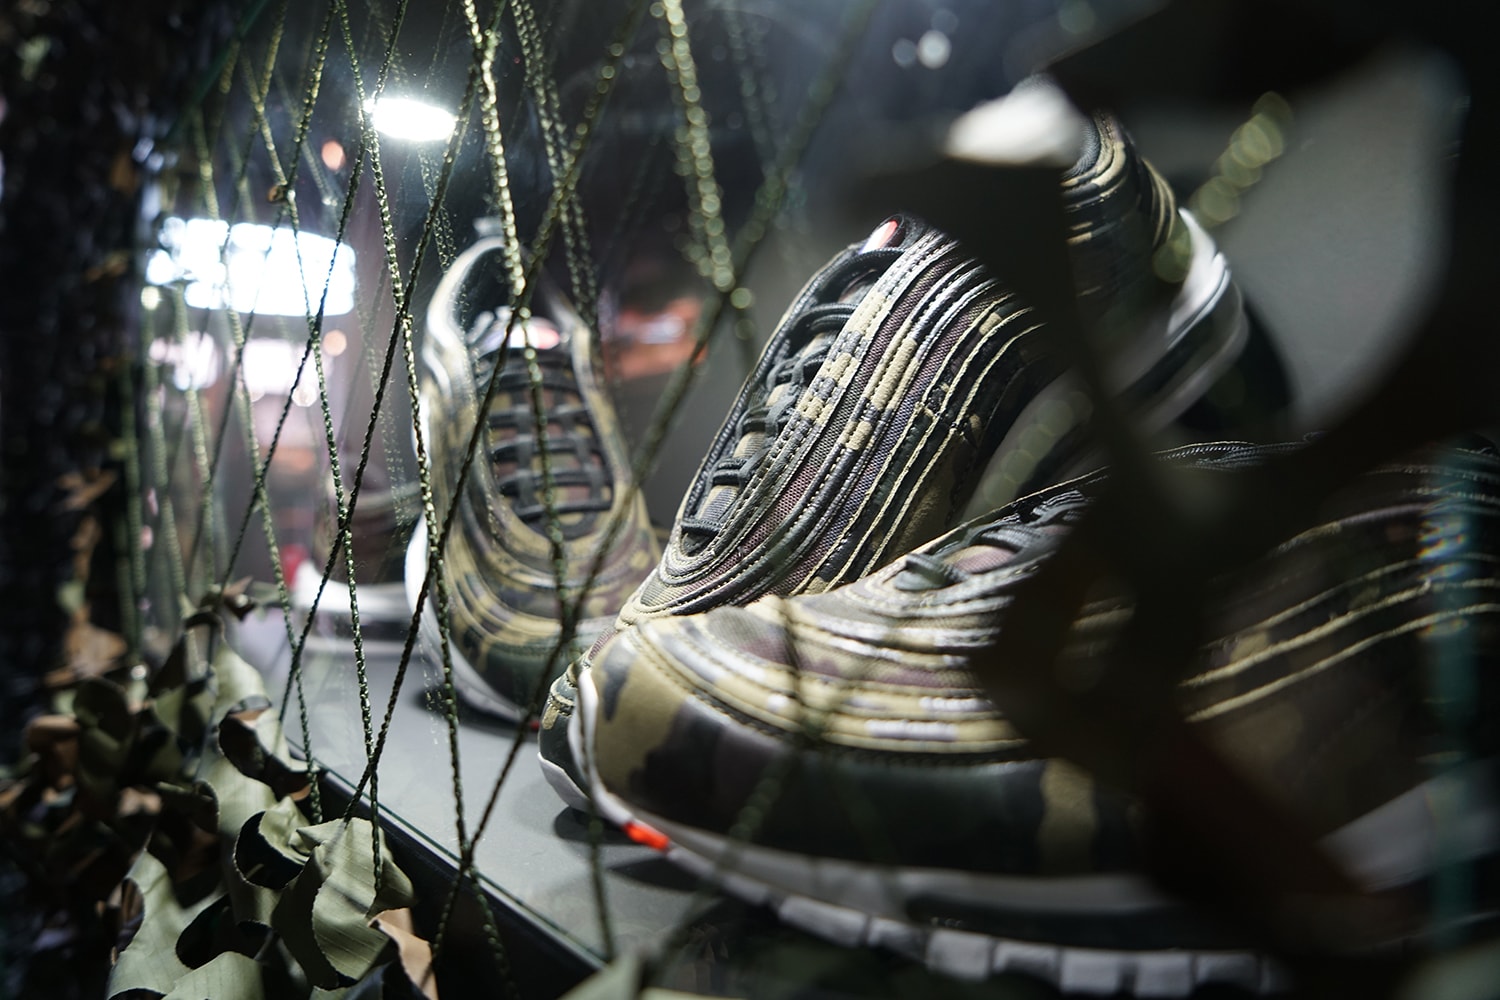 Malle Militaire Nike Air Max 97 Country Camo